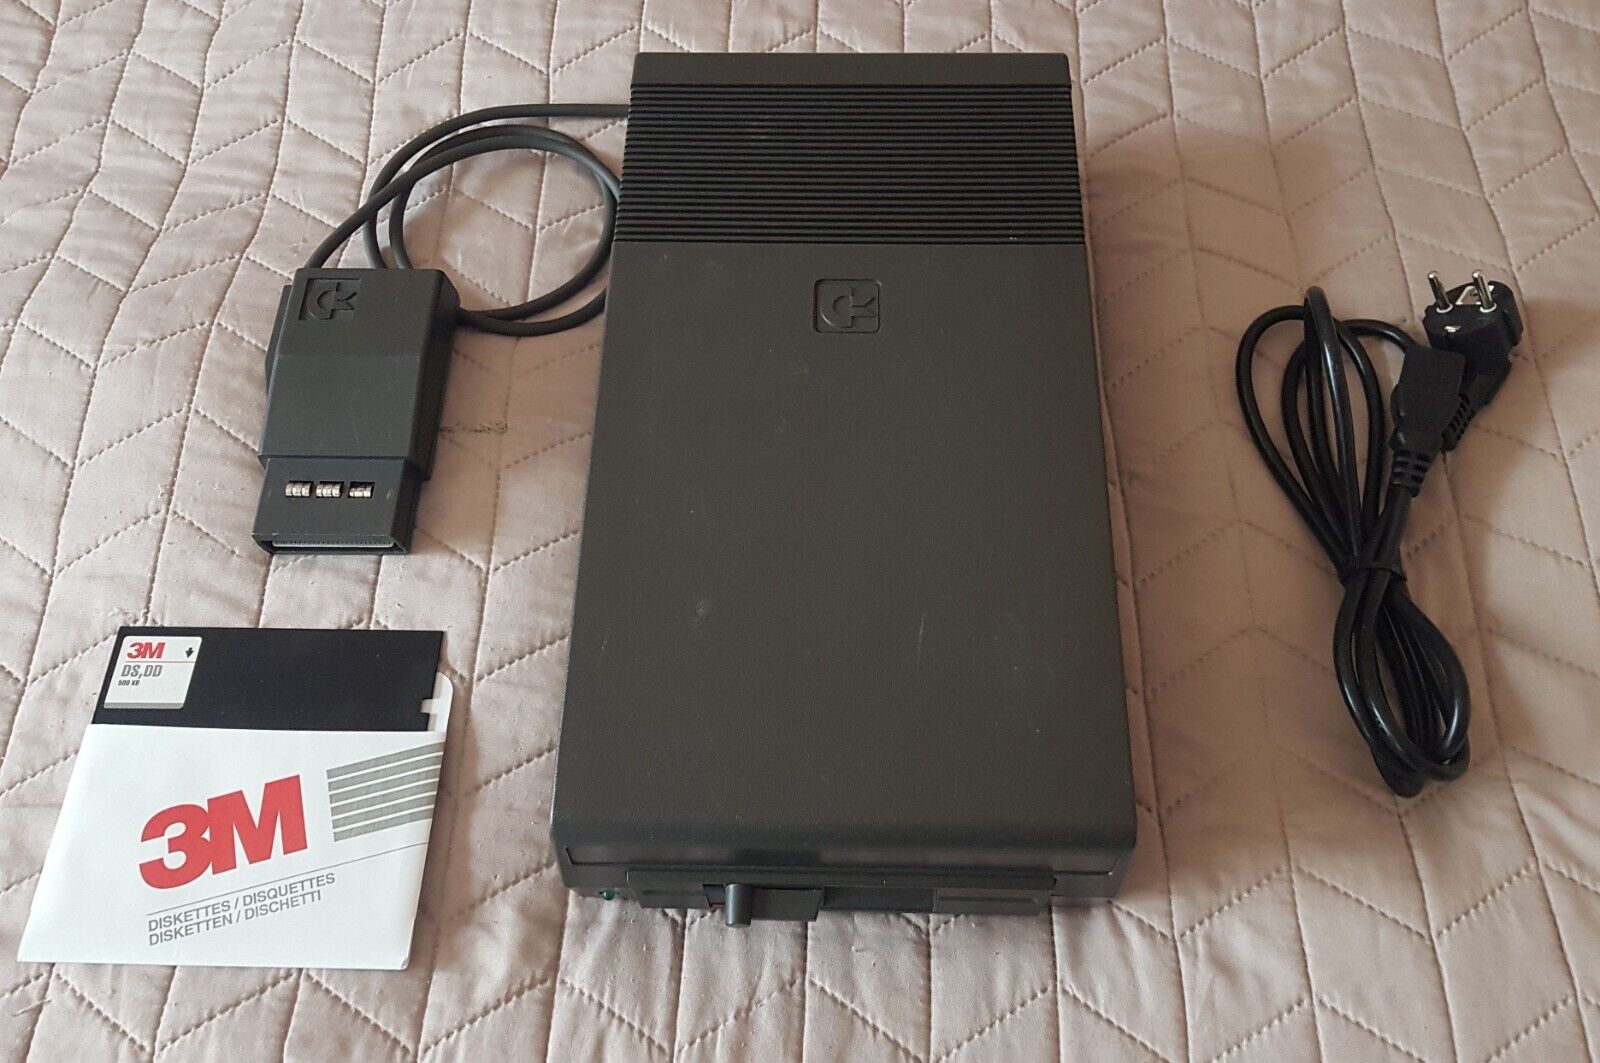 COMMODORE 1551 Single Floppy Disk Drive for Commodore Plus/4, working perfectly